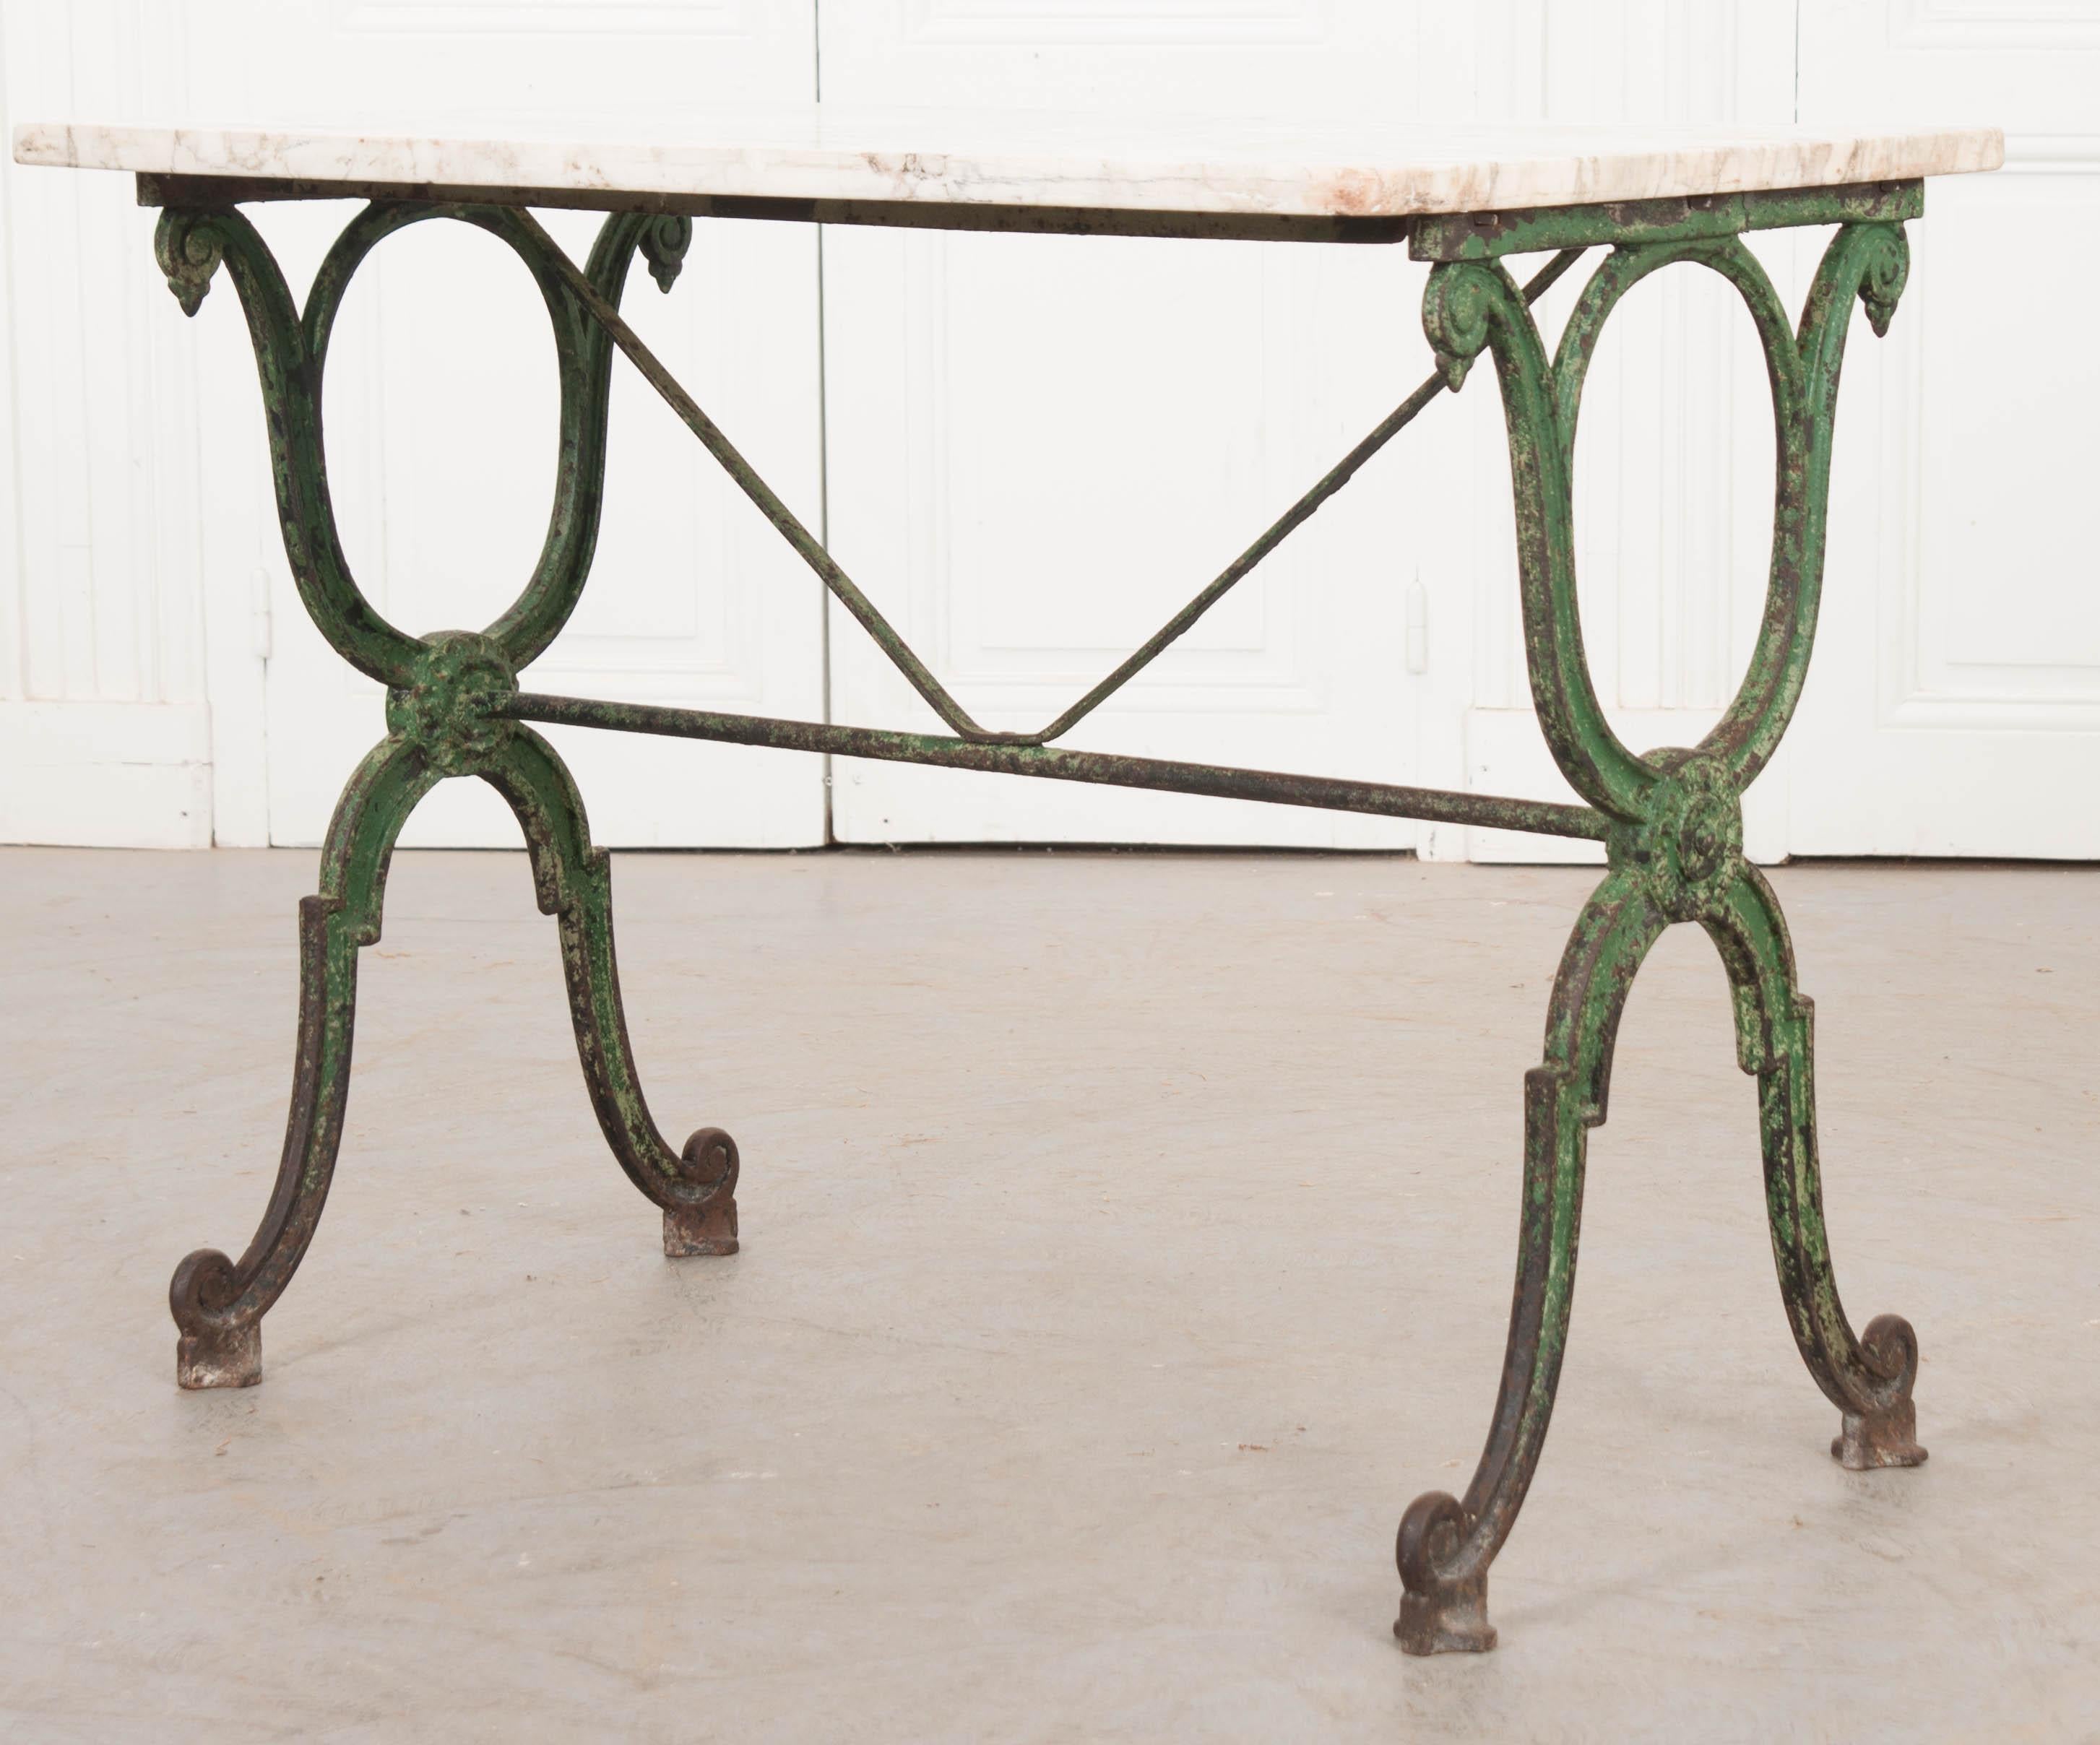 A delightful French marble-top garden table, circa 1890s, having an iron base that retains its original green paint! The white marble top has beautiful inclusions throughout. The classically styled iron base has X-form supports linked by an iron